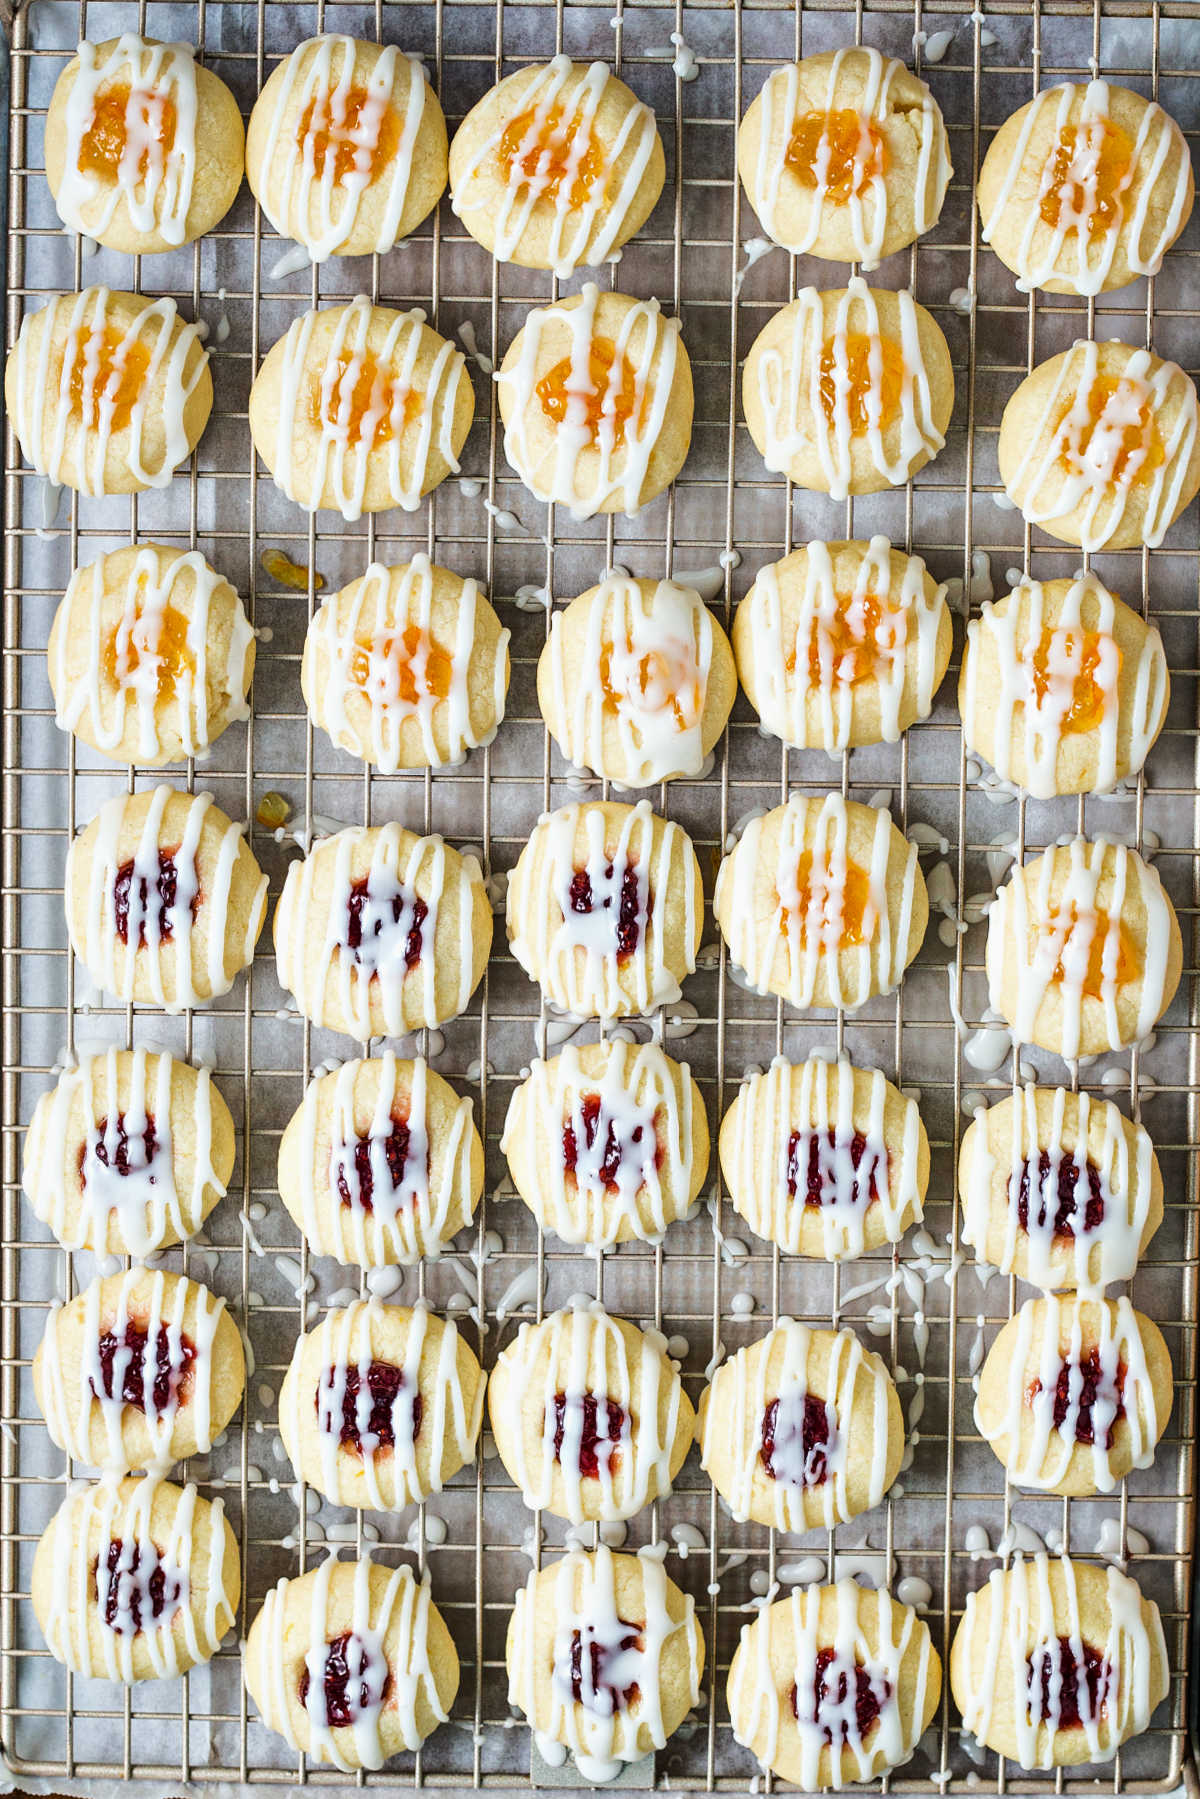 jam thumbprint cookies on a wire rack drizzled with glaze.